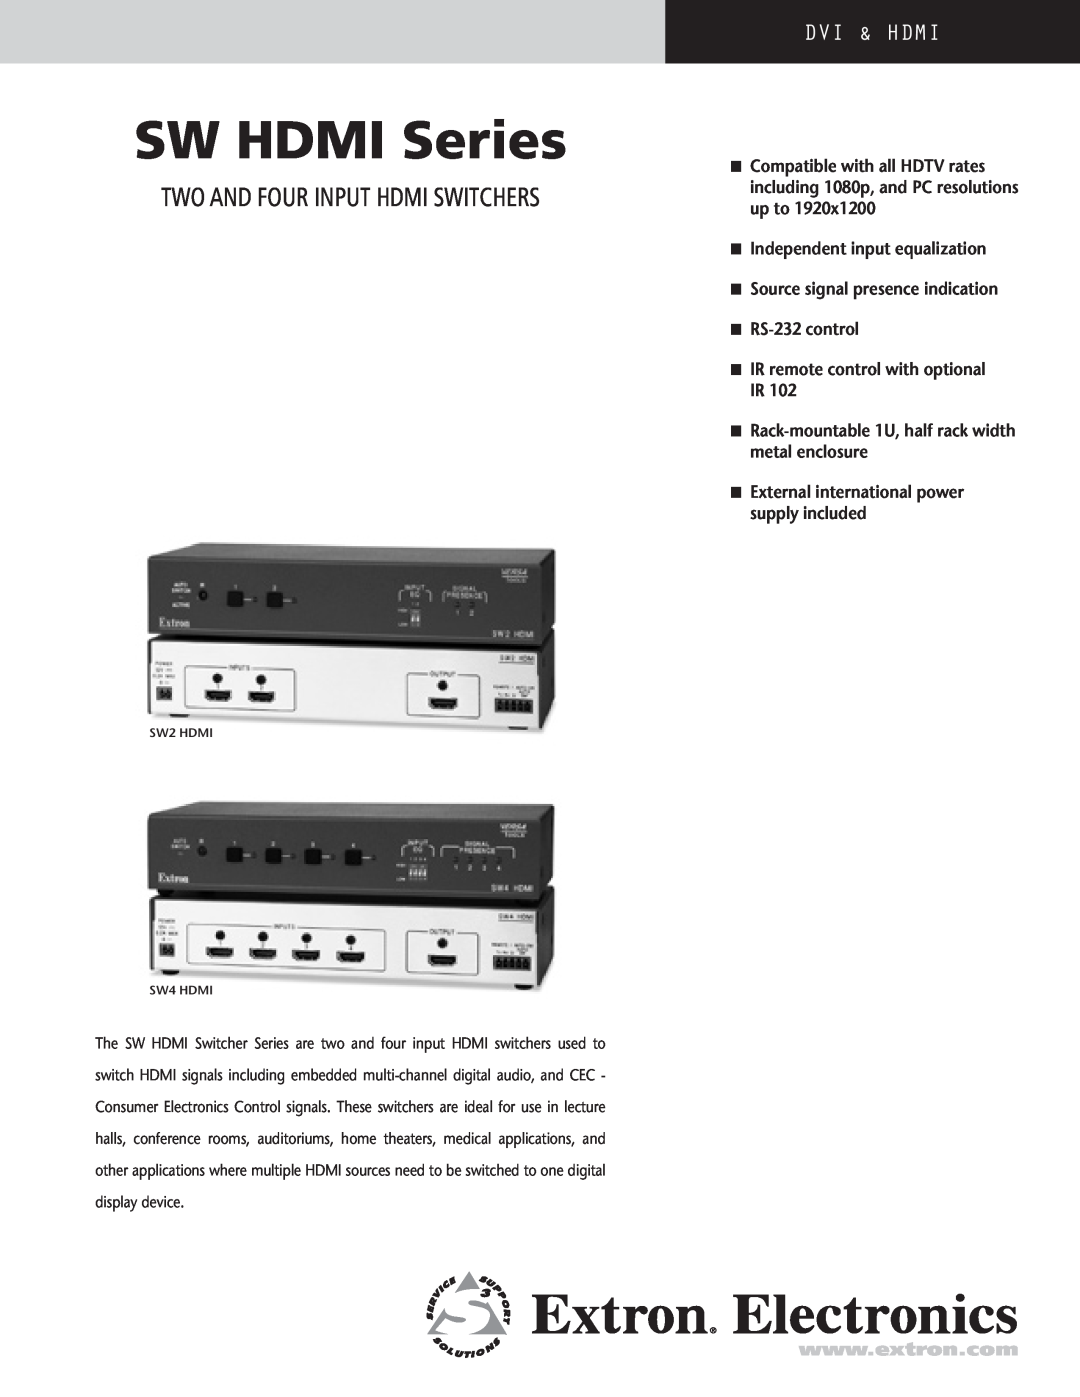 Extron electronic SW HDMI Series manual Two and four input HDMI Switchers, Dvi & Hdmi 